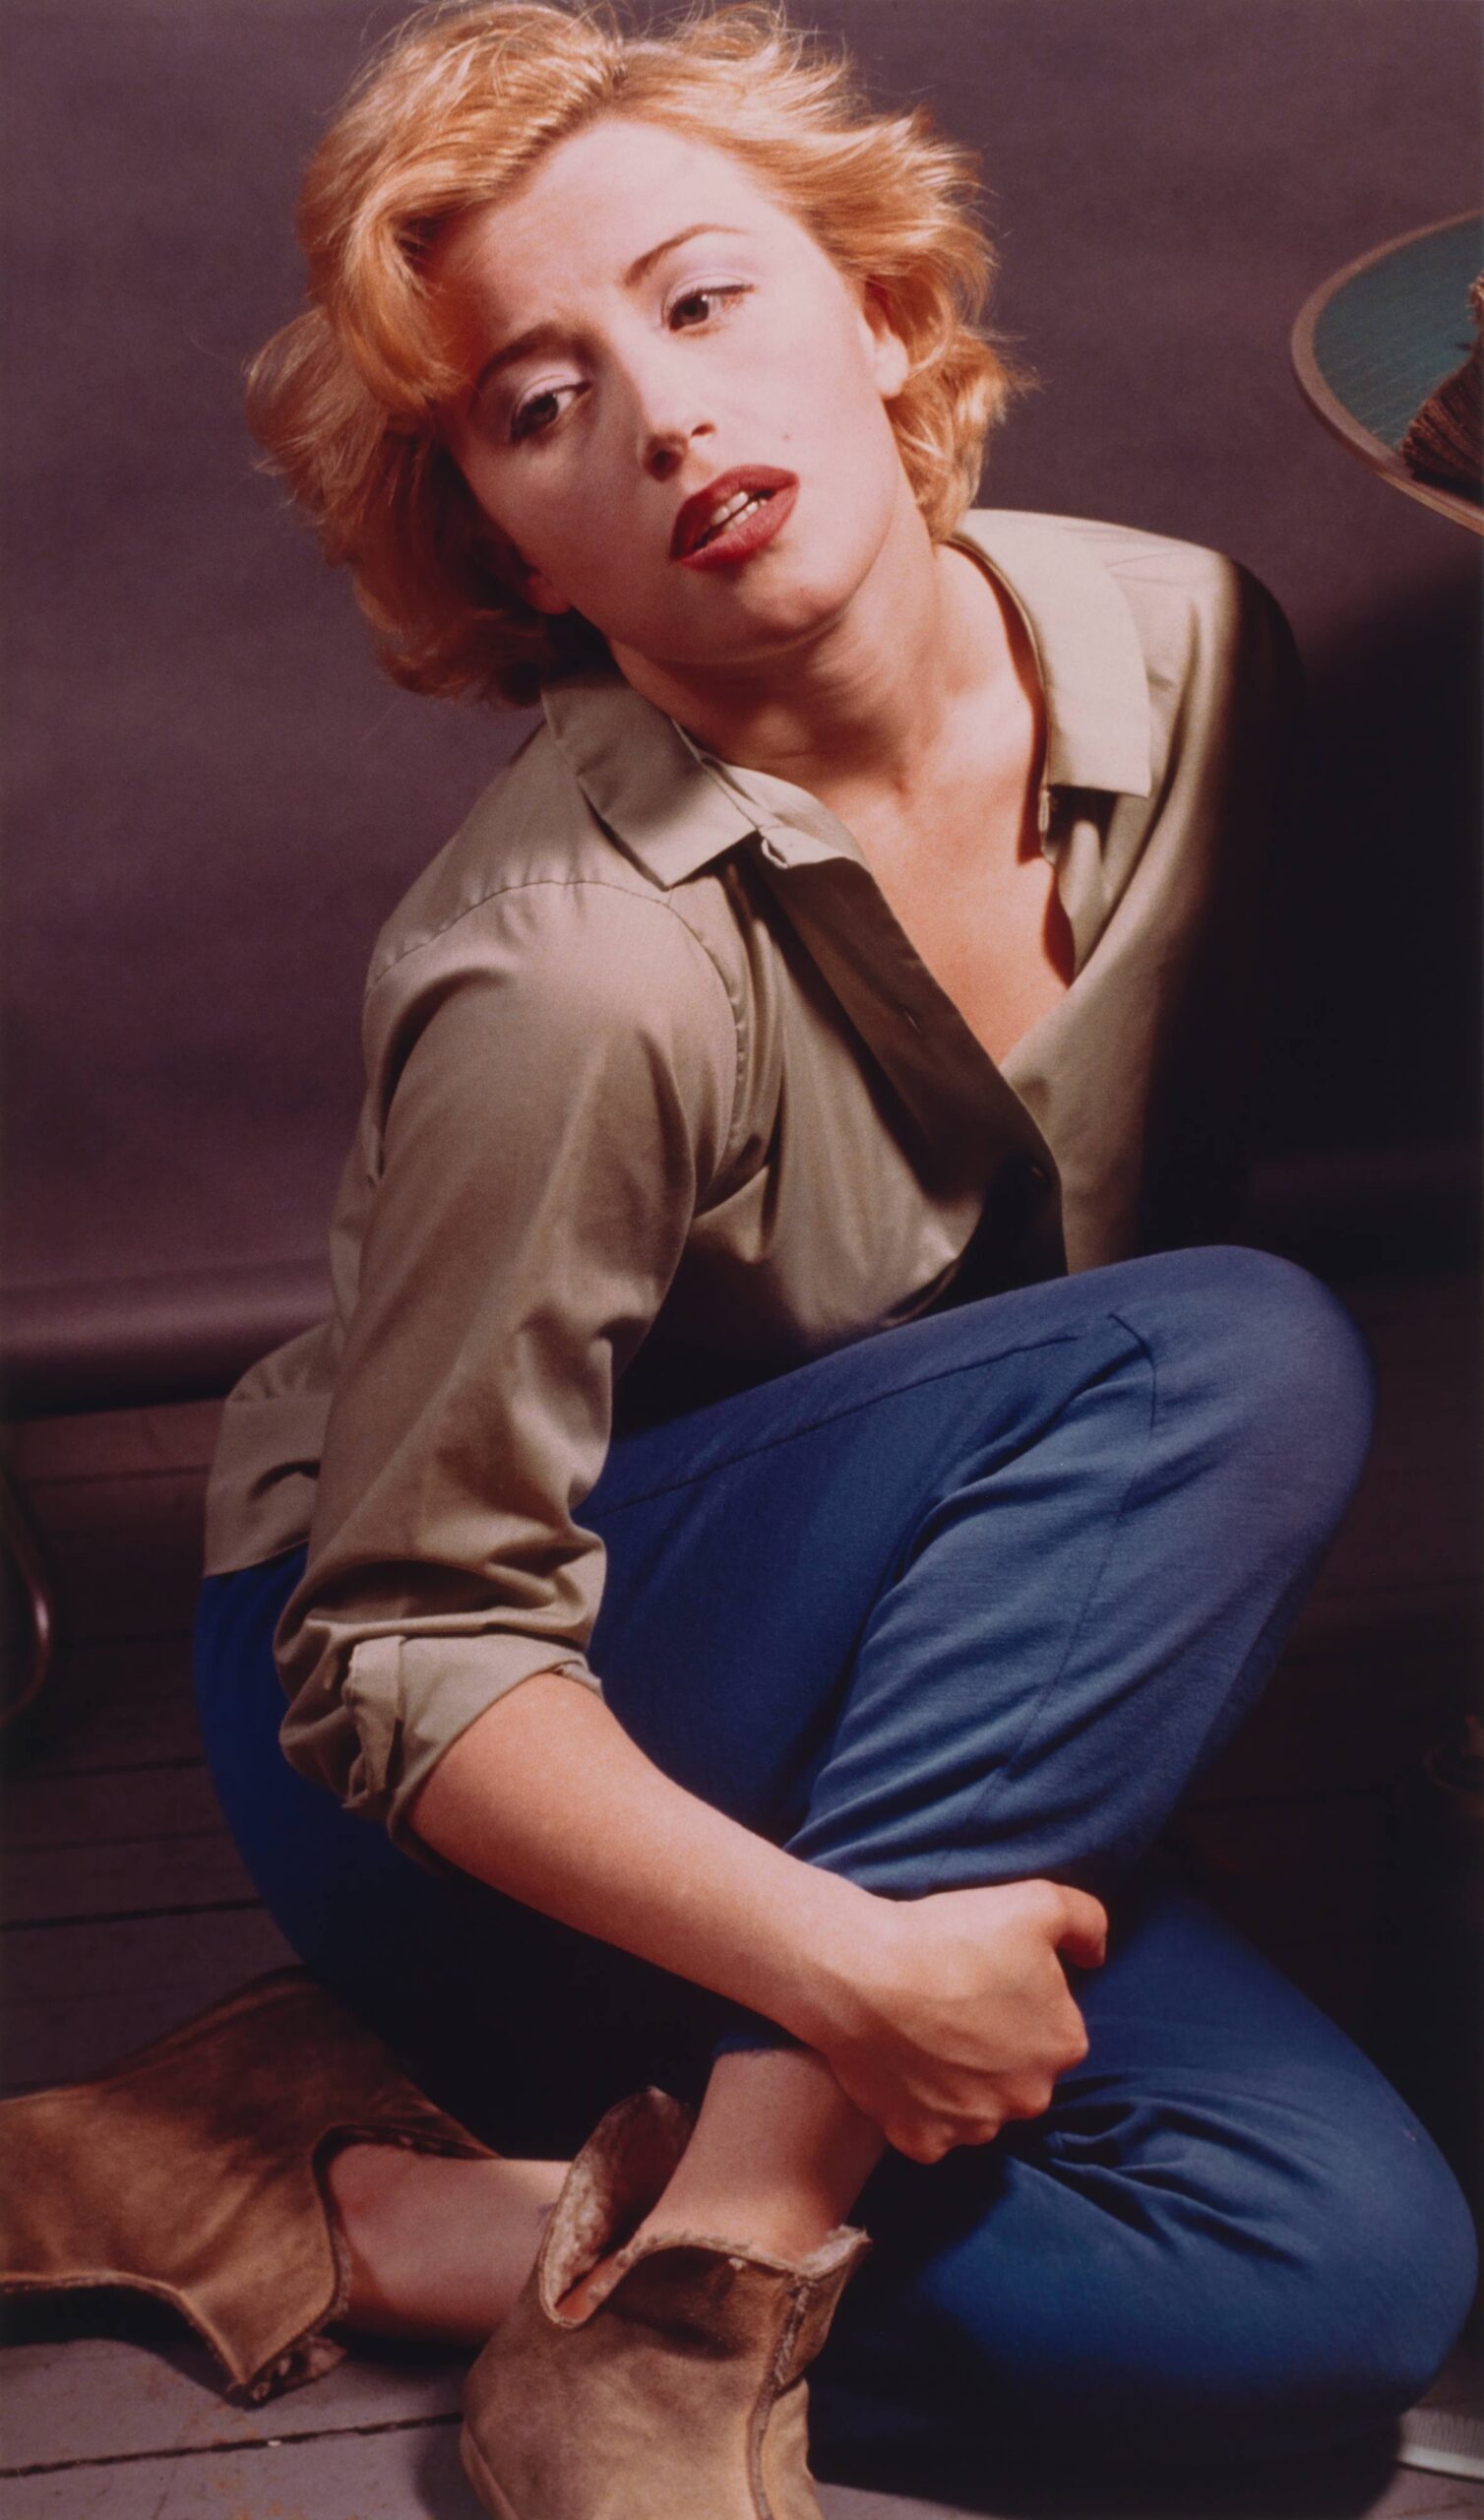 A photograph Cindy Sherman dressed as Marilyn Monroe wearing blue pants and a tan blouse and sitting on the floor.